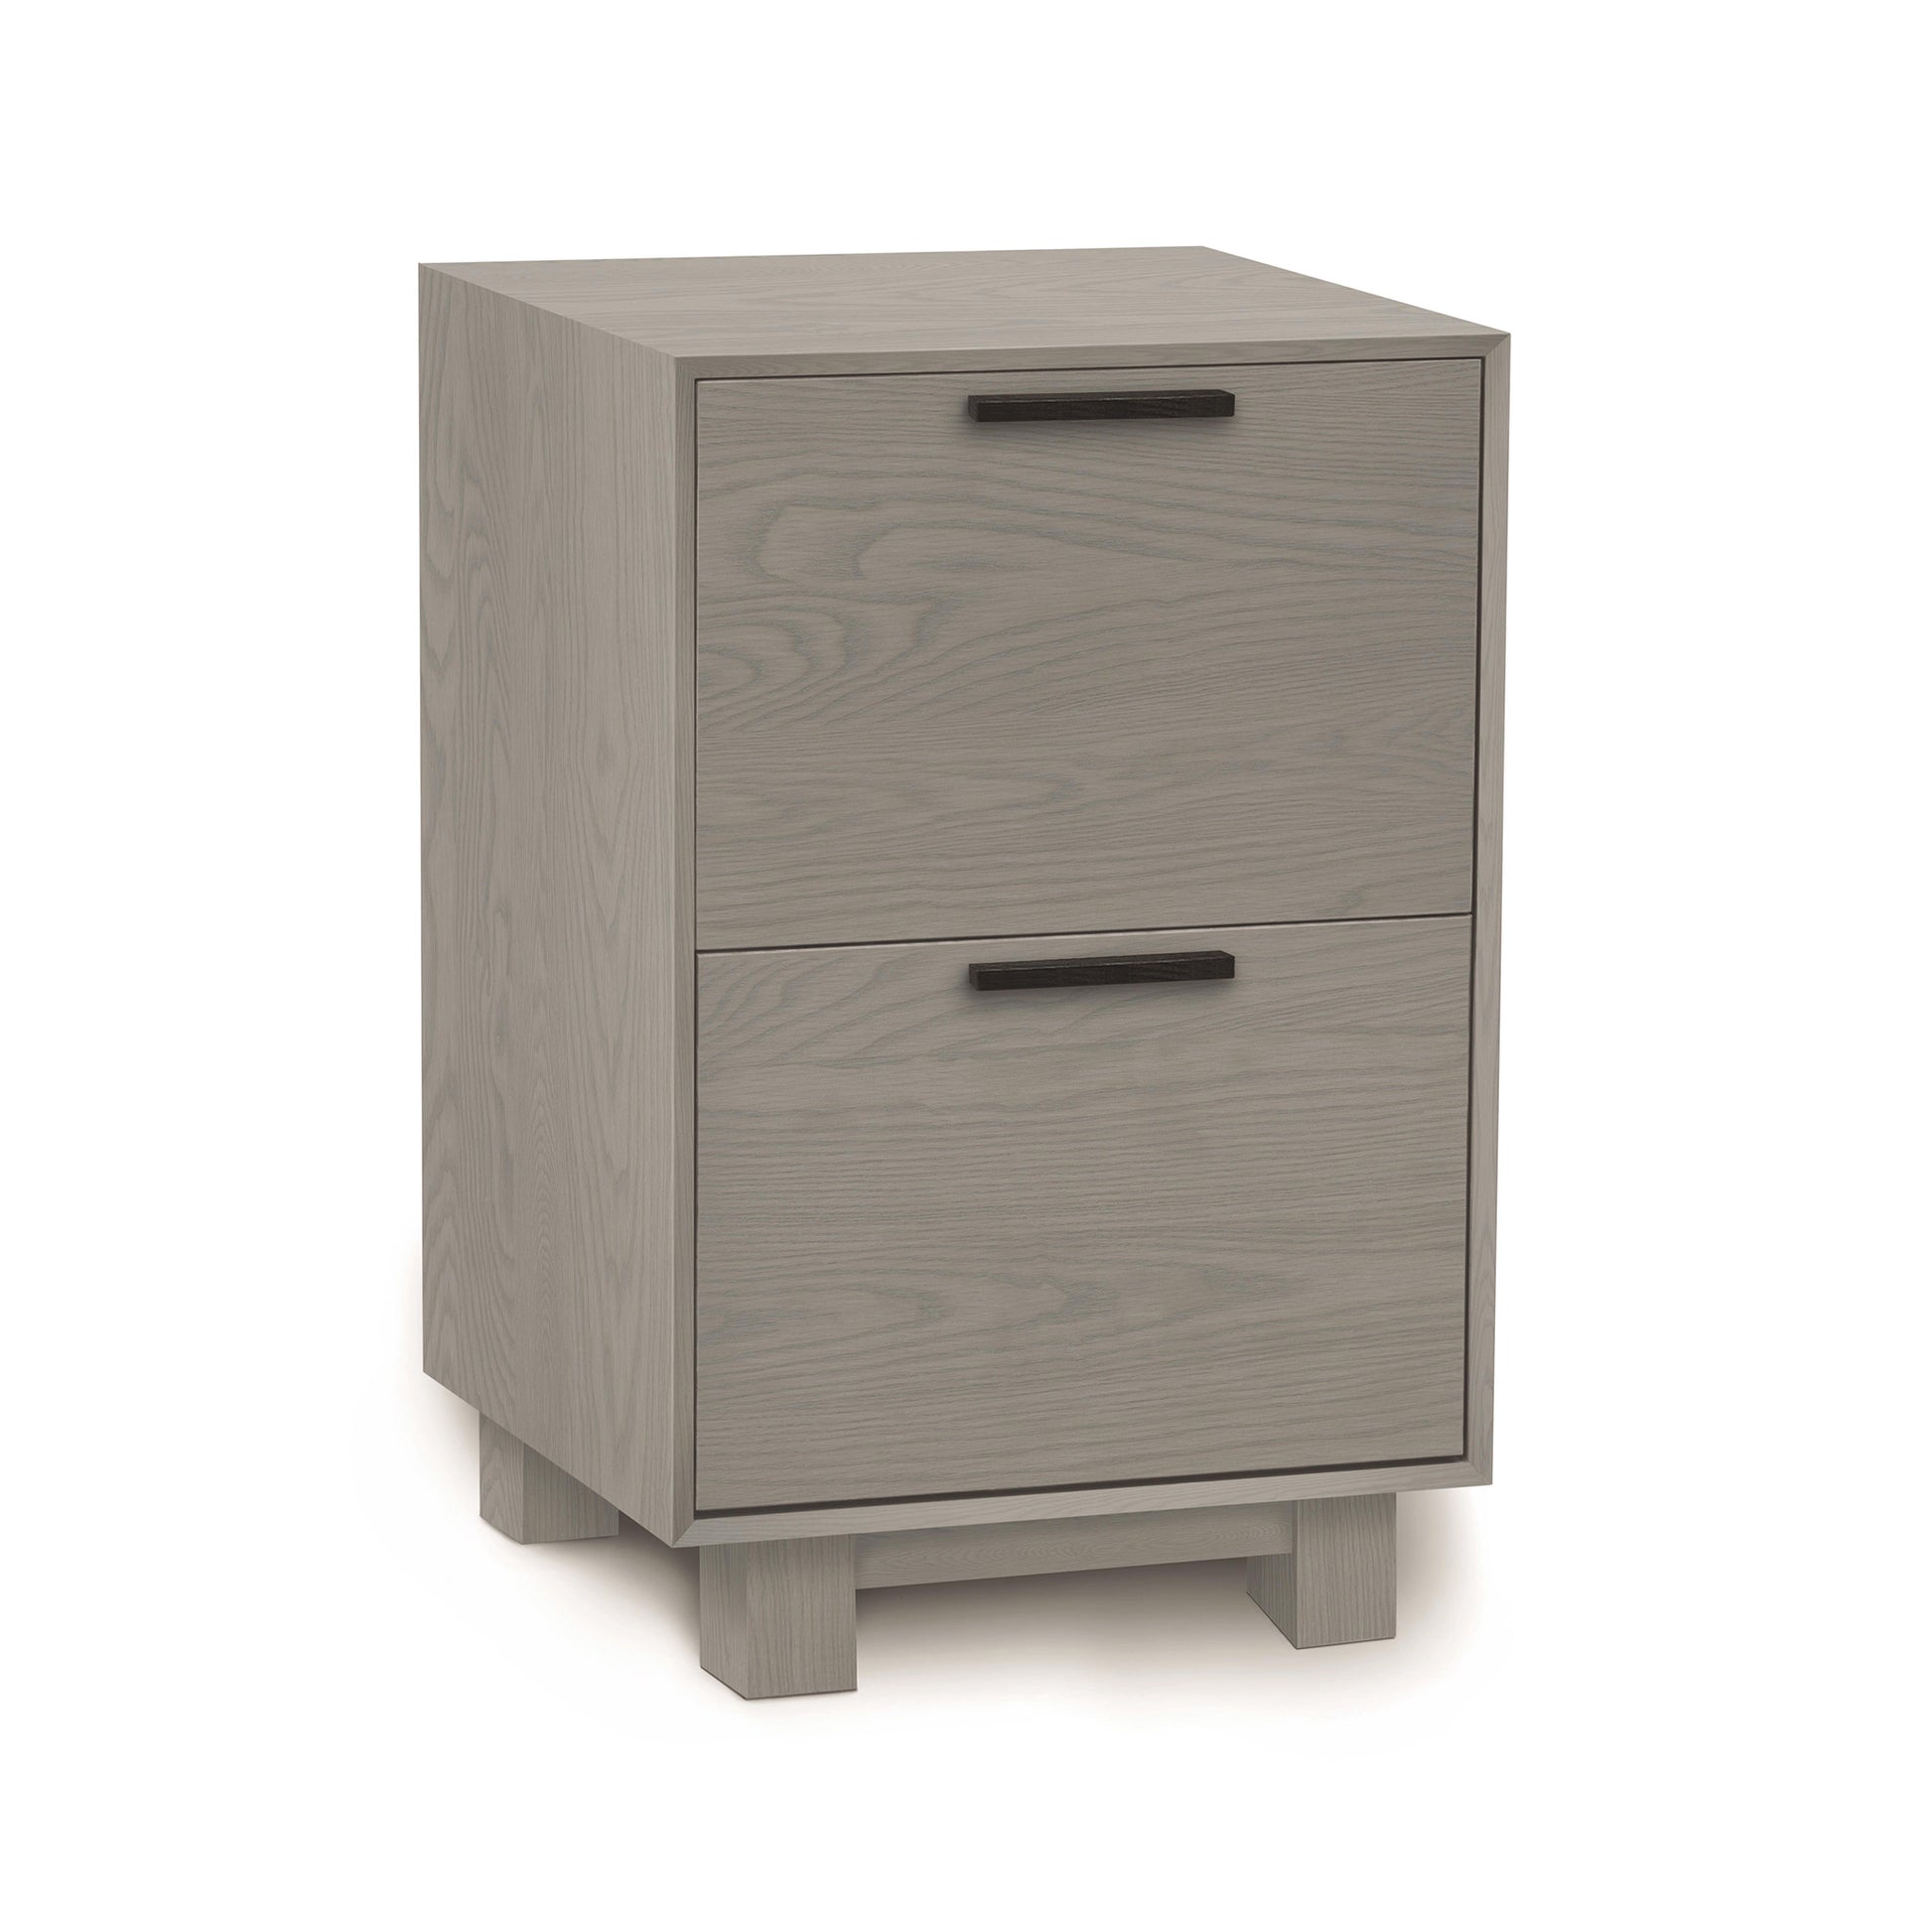 A Copeland Furniture Linear Narrow File Cabinet with two drawers.